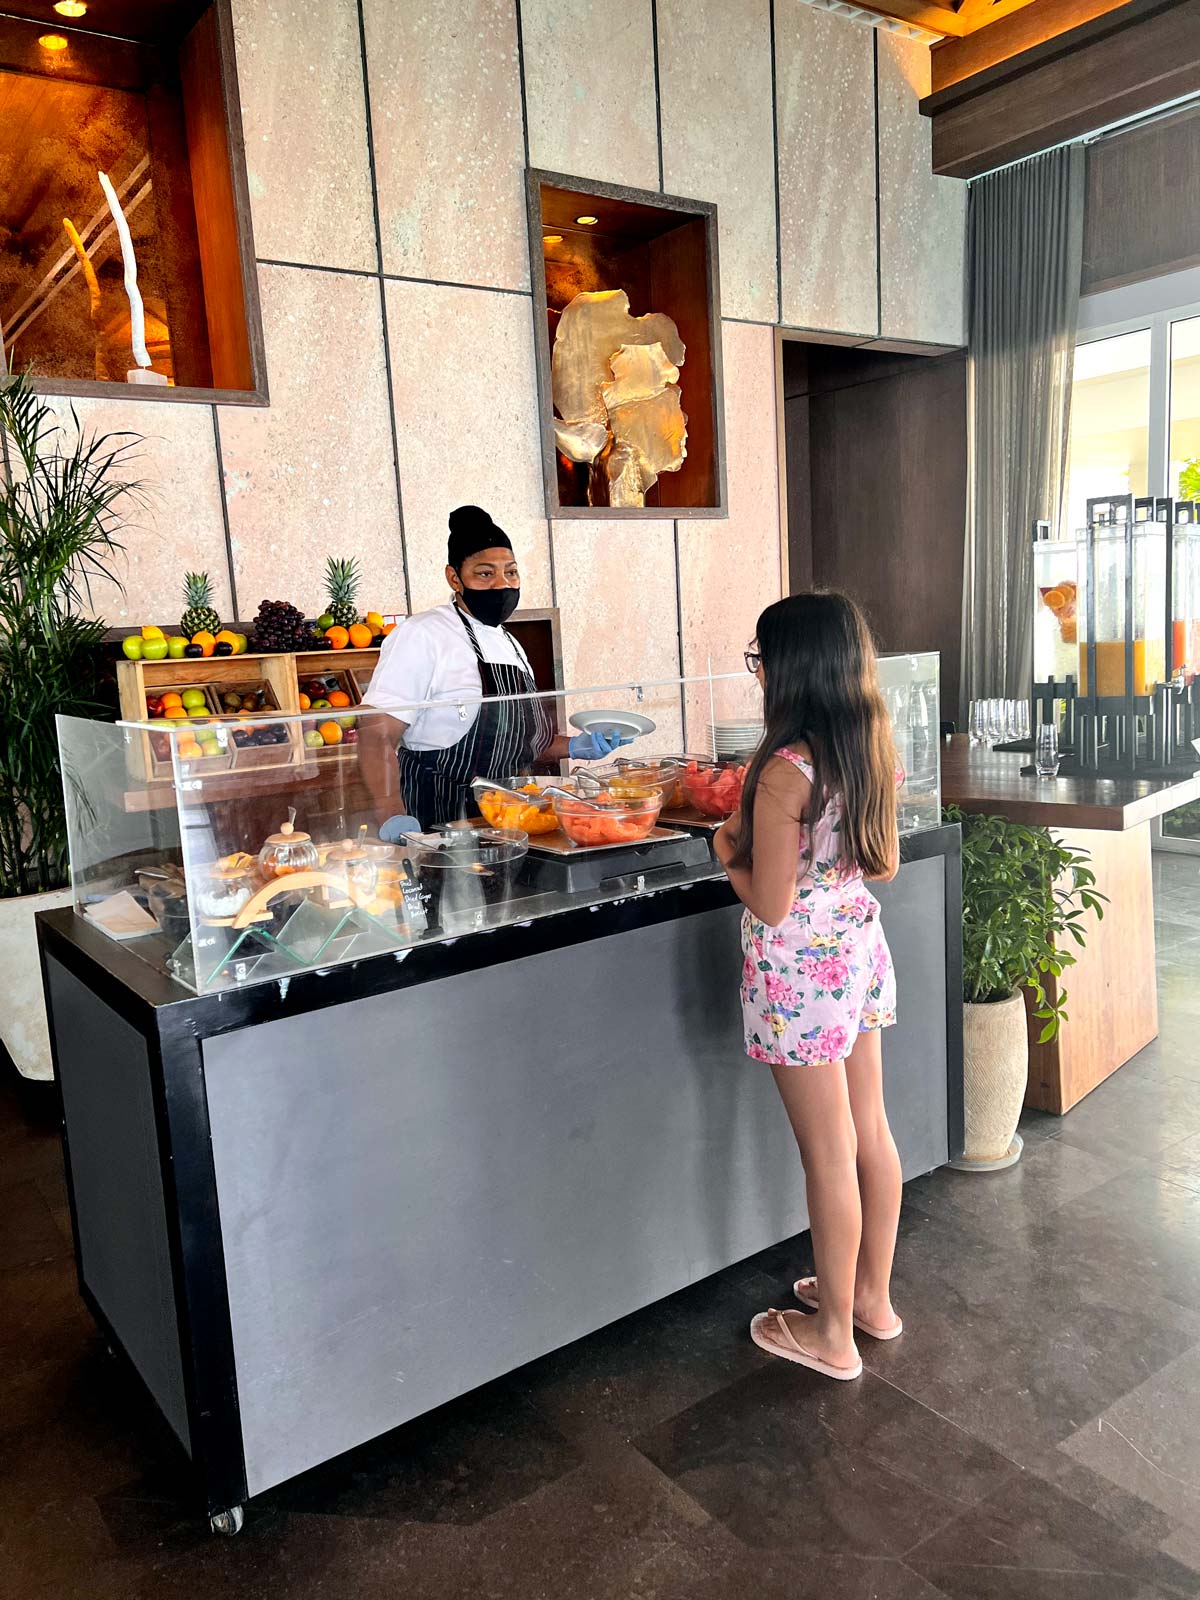 A young girl retrieves buffet breakfast items with staff help.